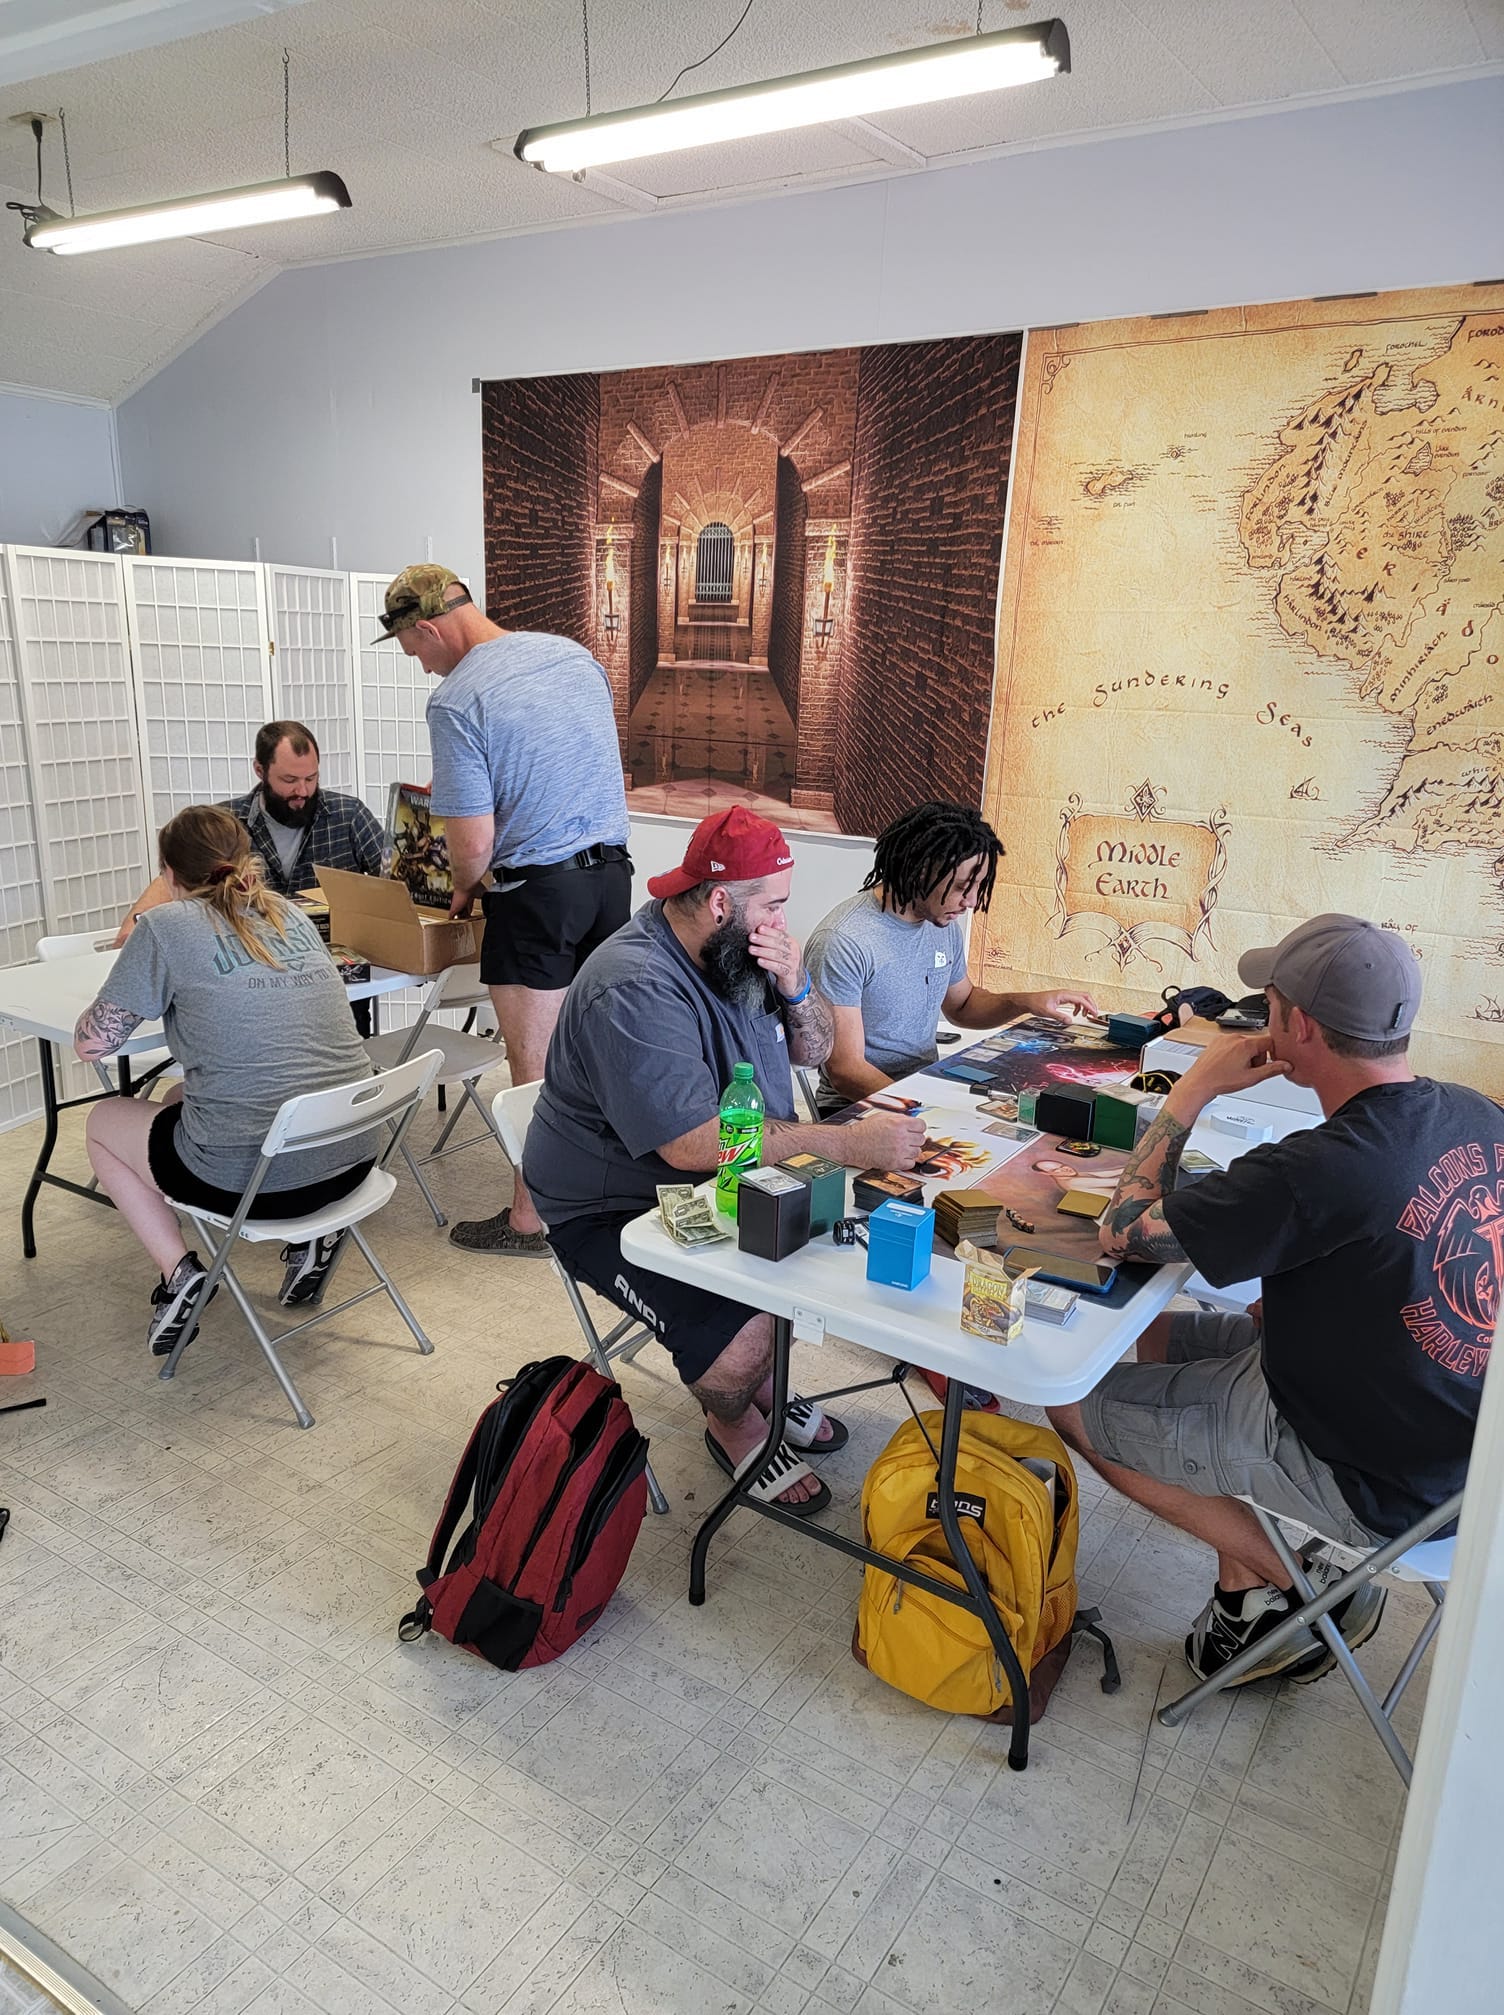 Magic the Gathering, WarHammer, and Dungeons and Dragons are just some of the games regulars play at The Box in Leesville.